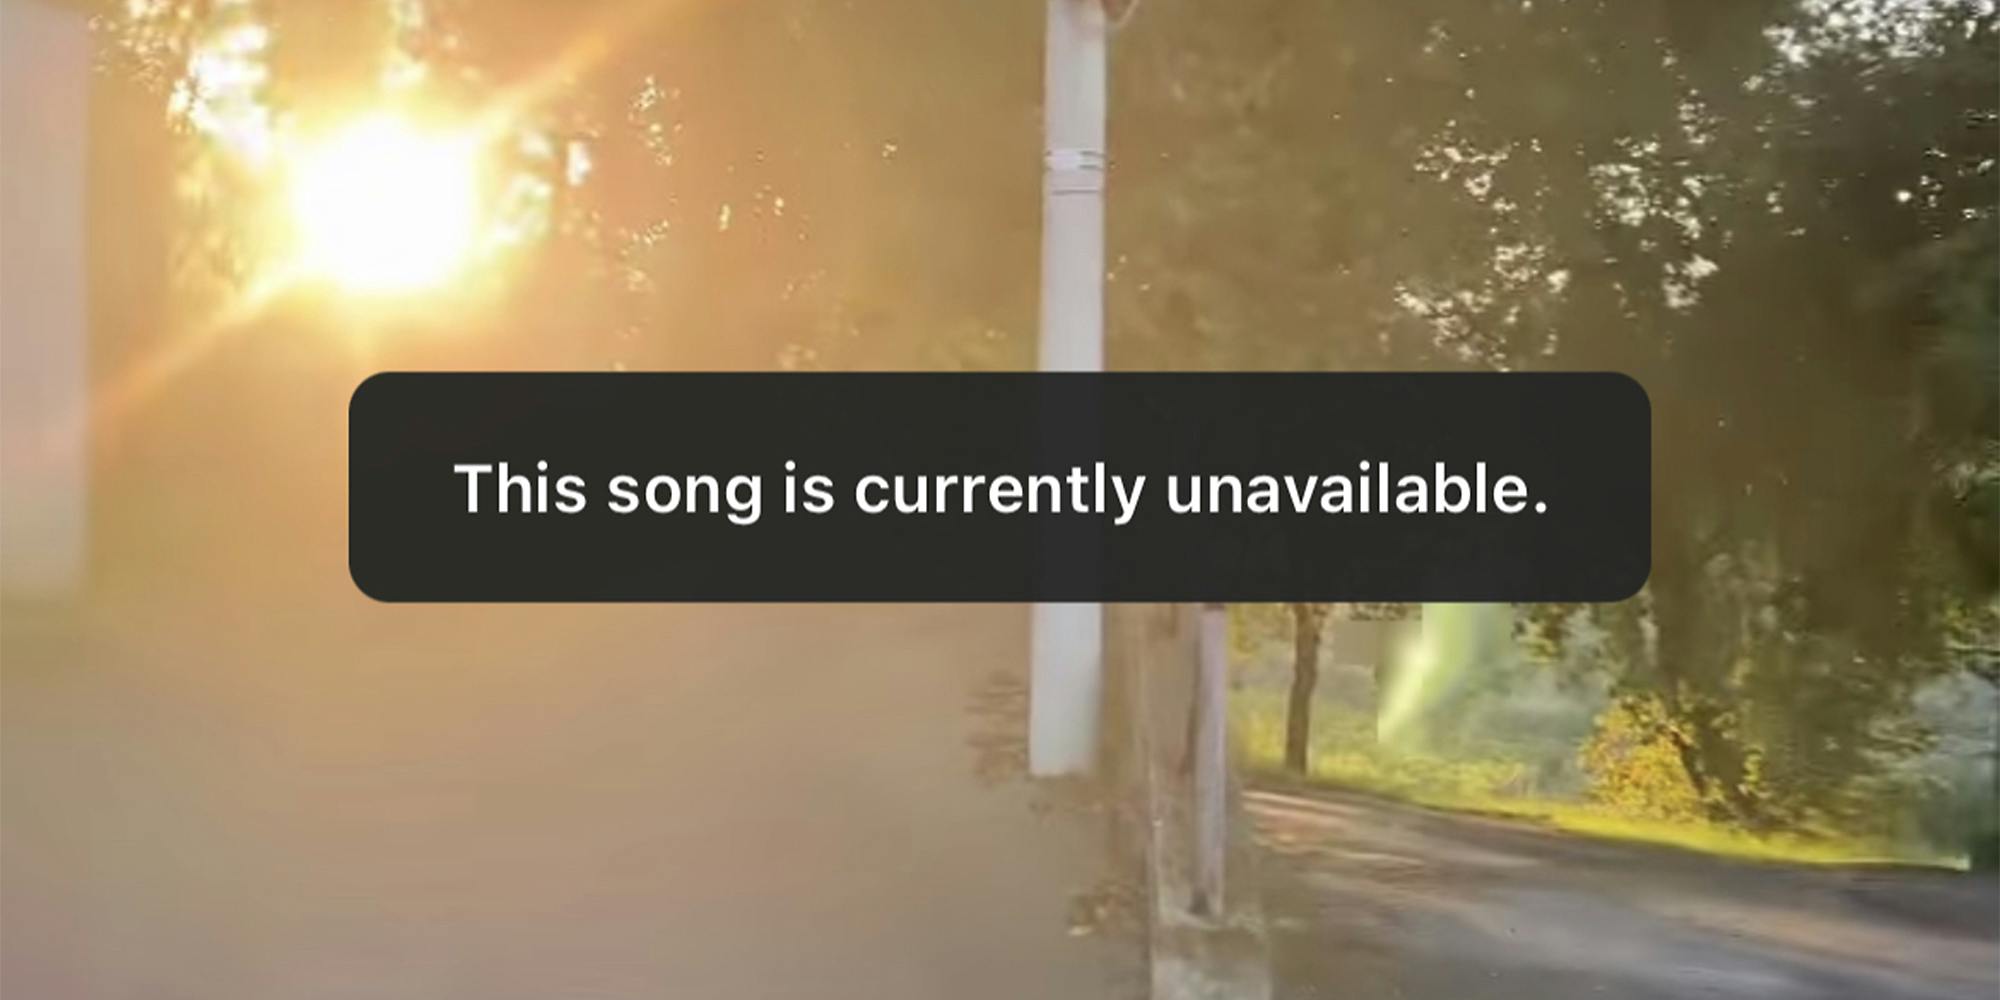 "This song is currently unavailable." over sunset background